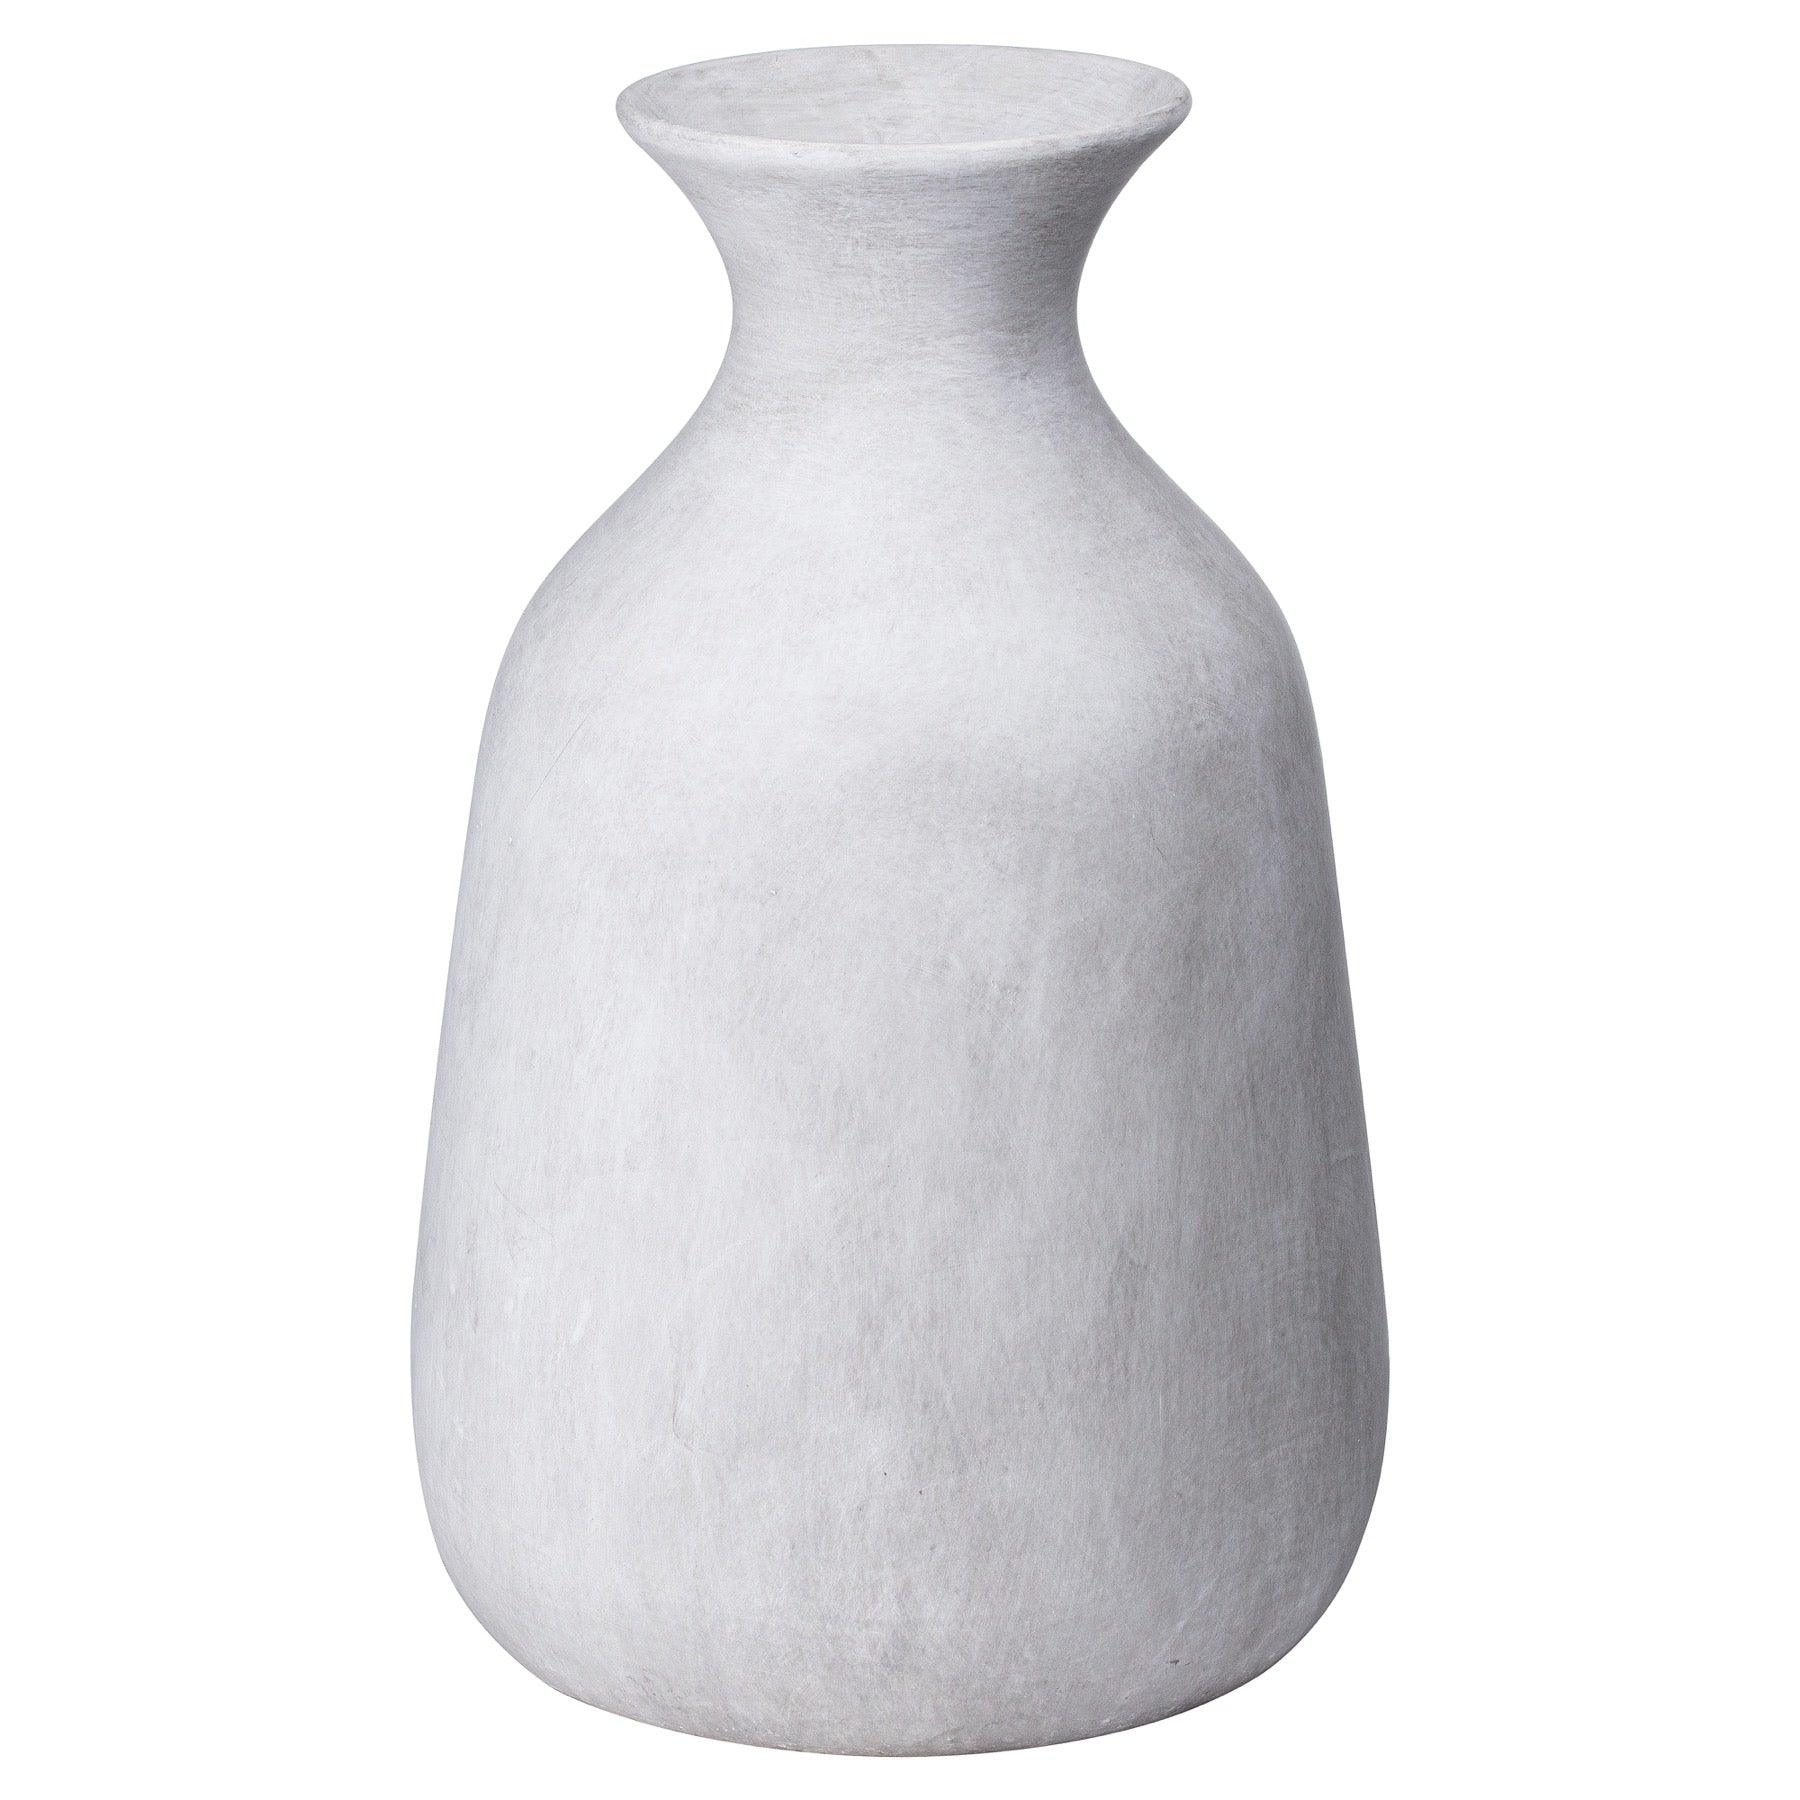 View Darcy Ople Stone Vase information